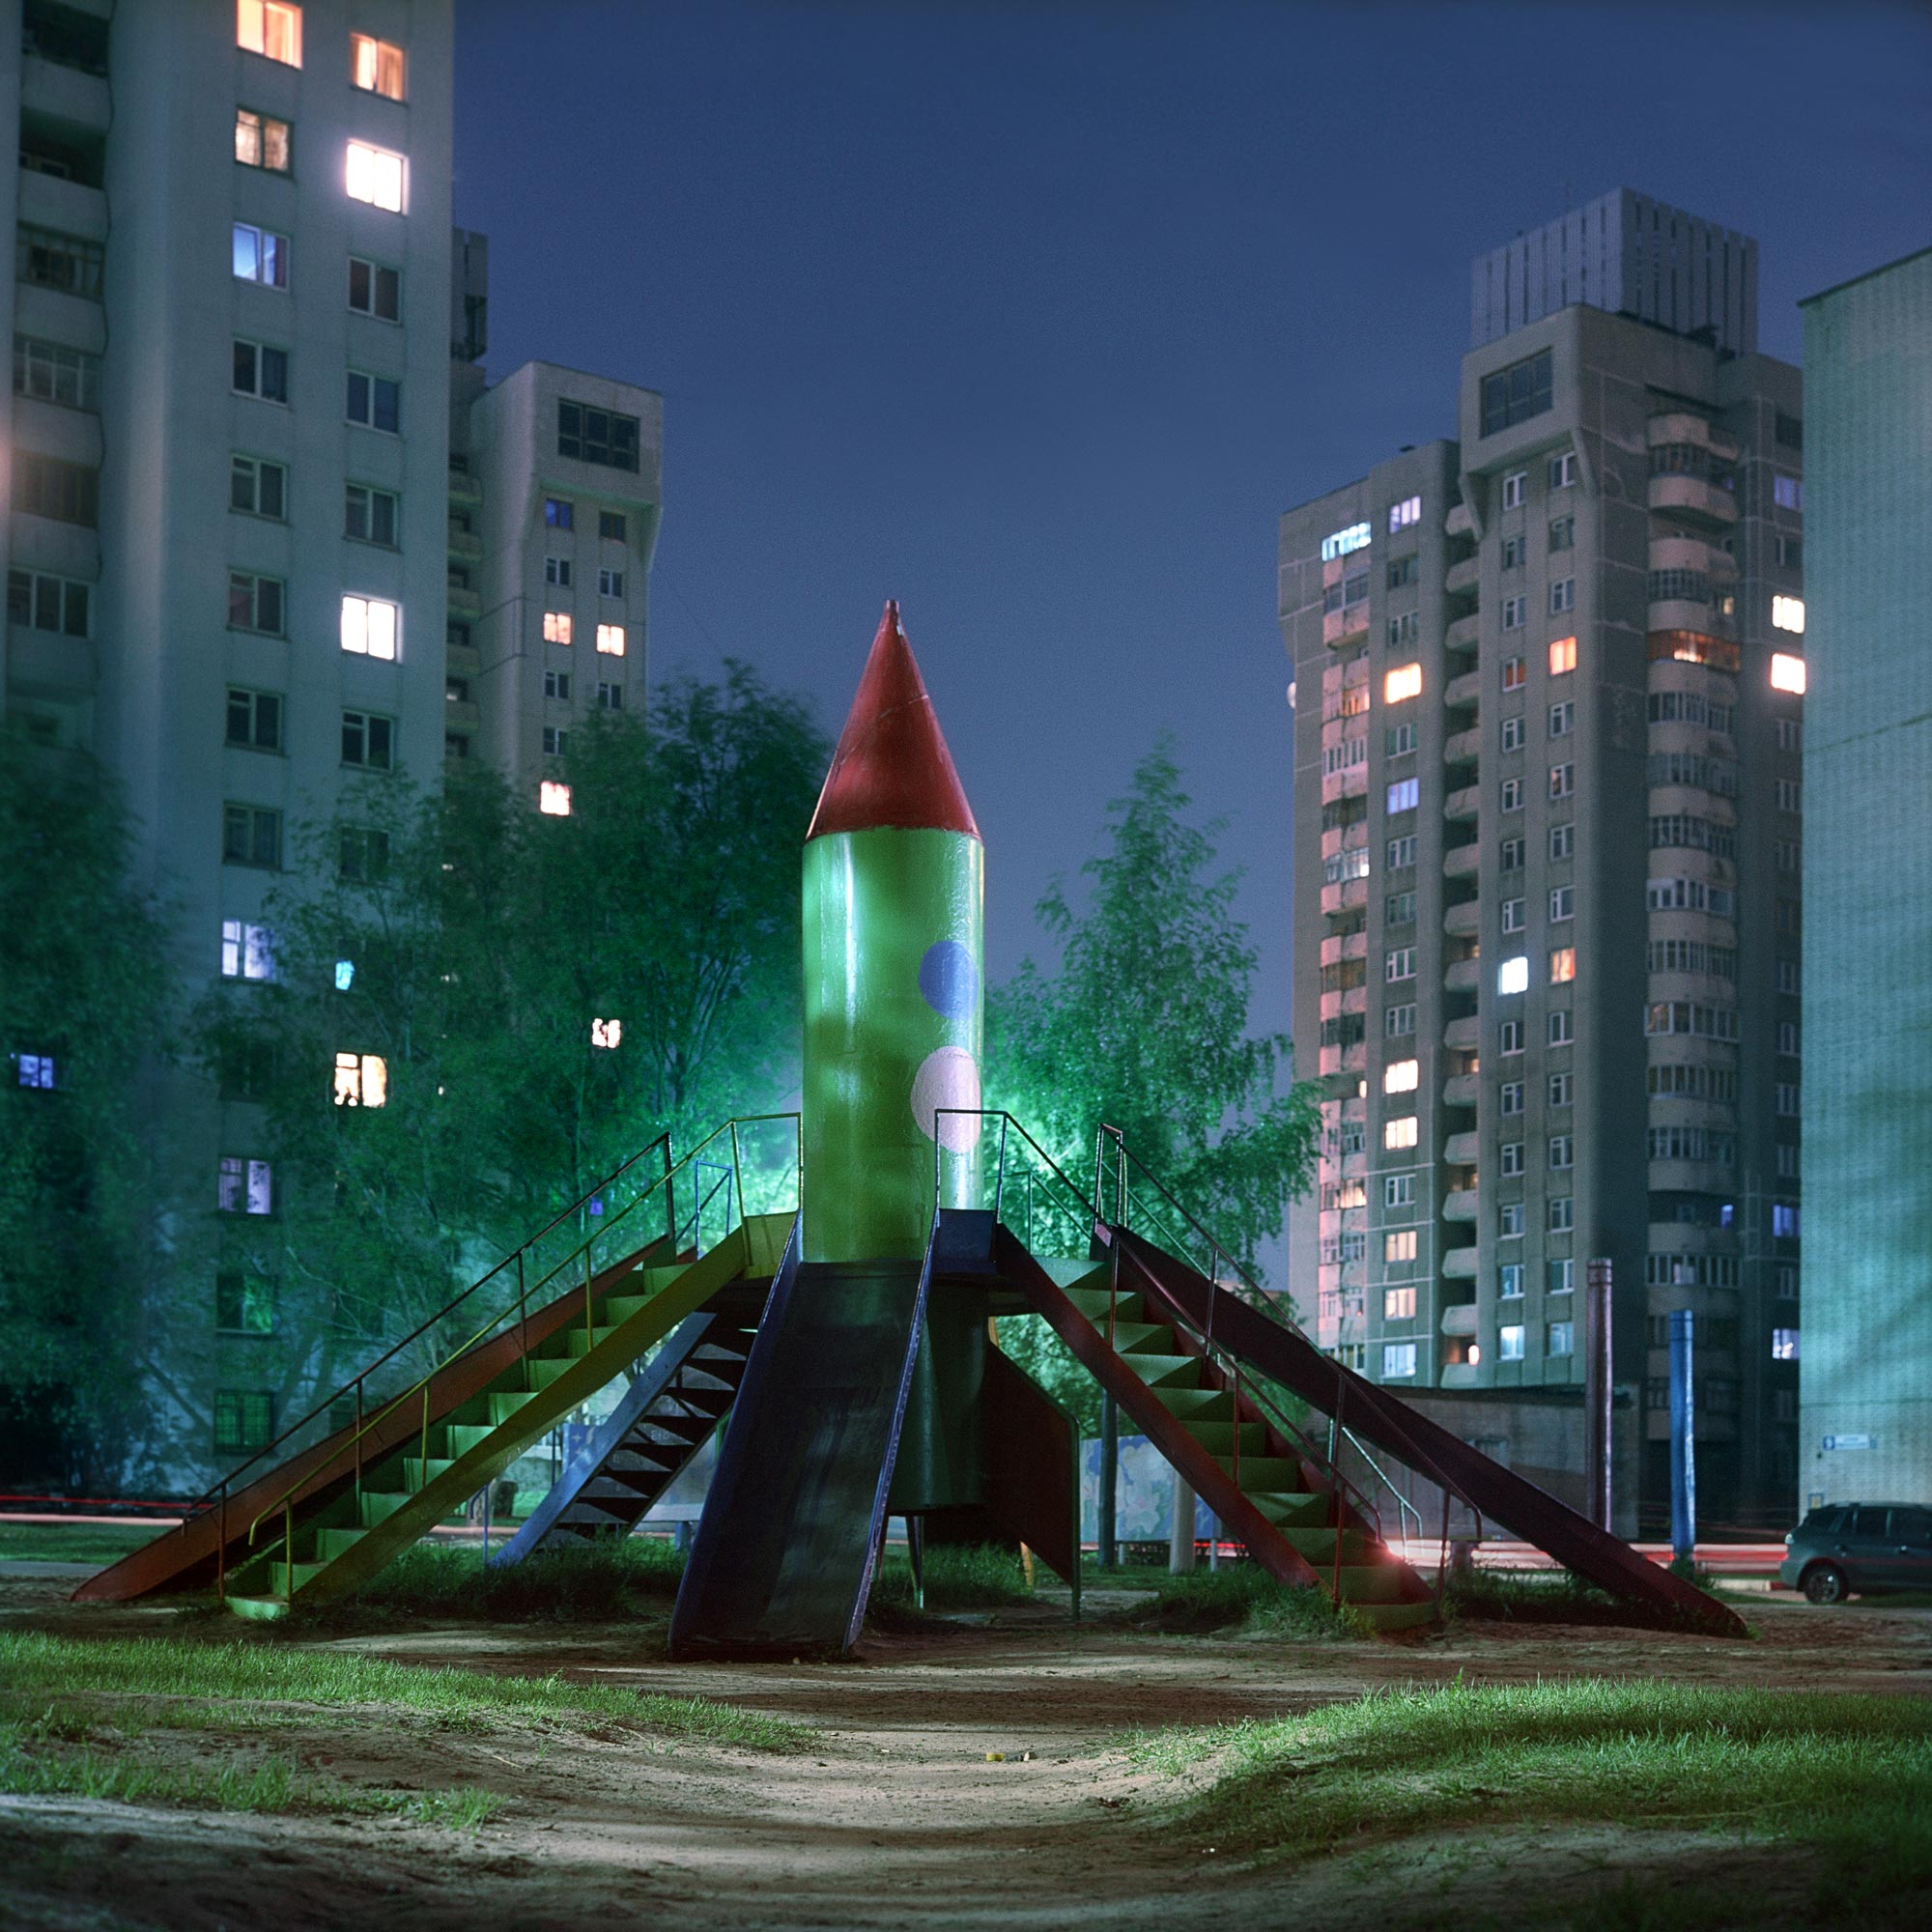 Rockets away: how Soviet space dreams became child’s play